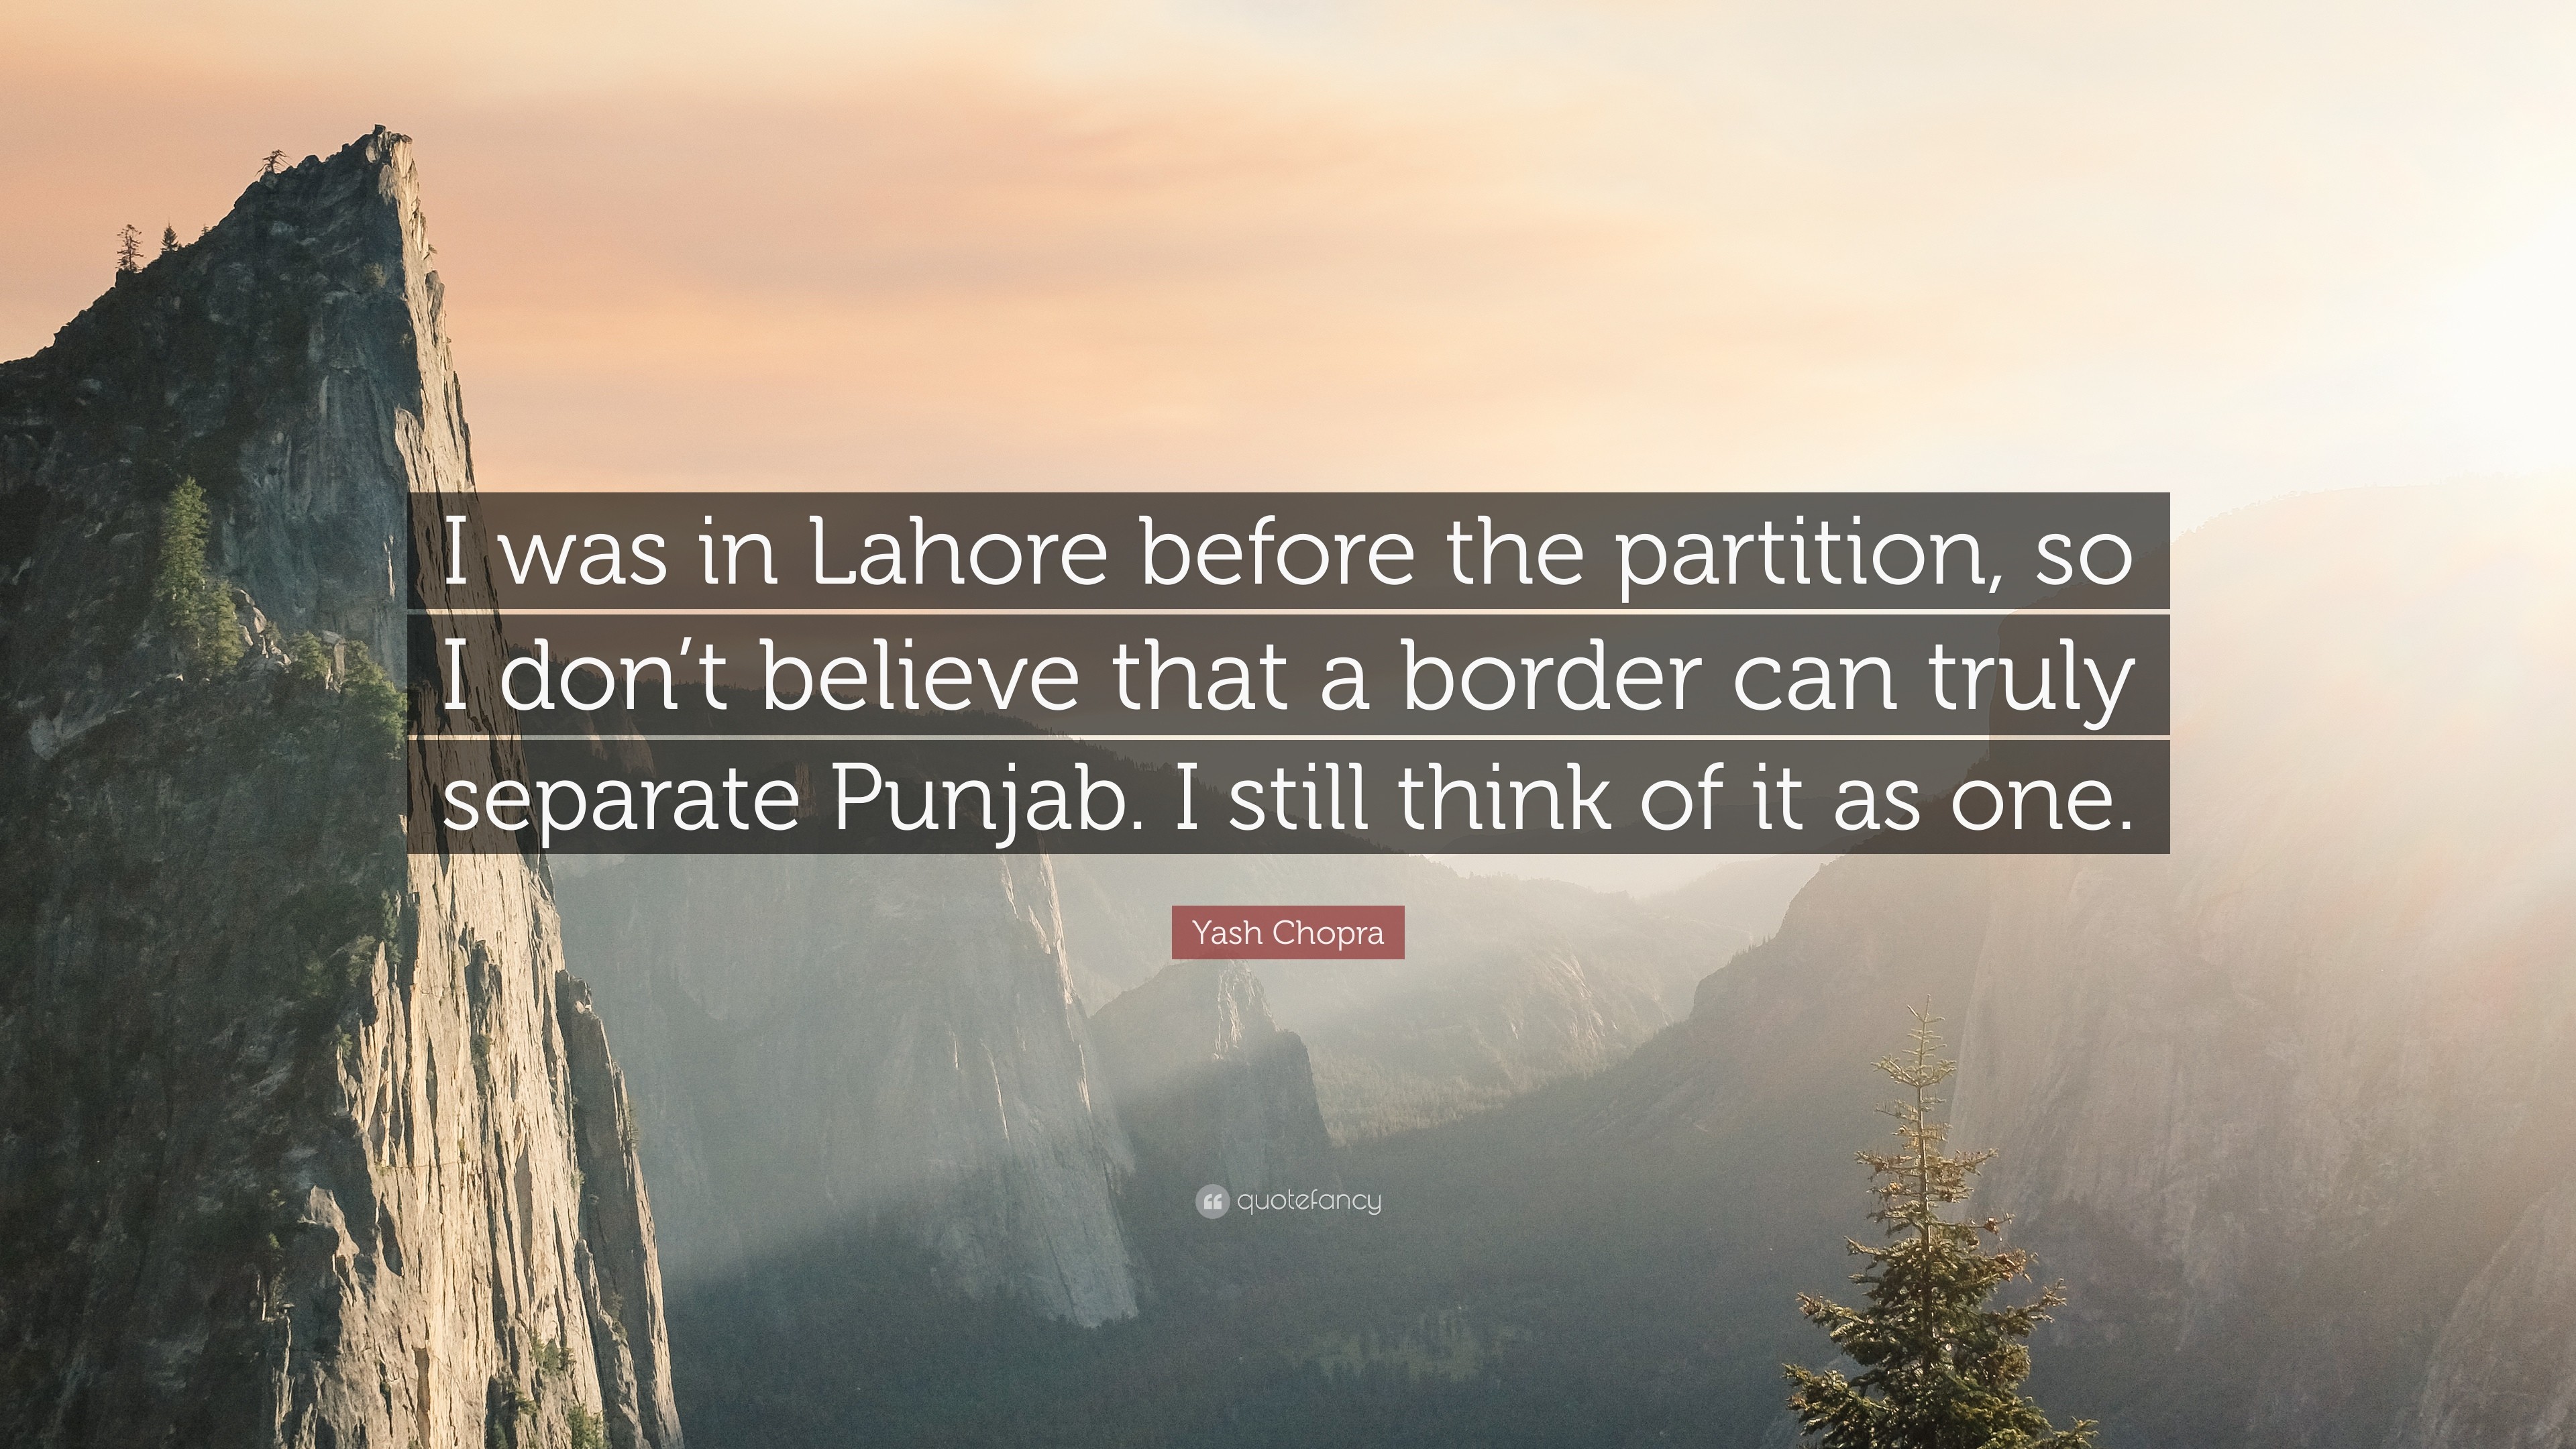 3840x2160 Yash Chopra Quote: “I was in Lahore before the partition, so I don